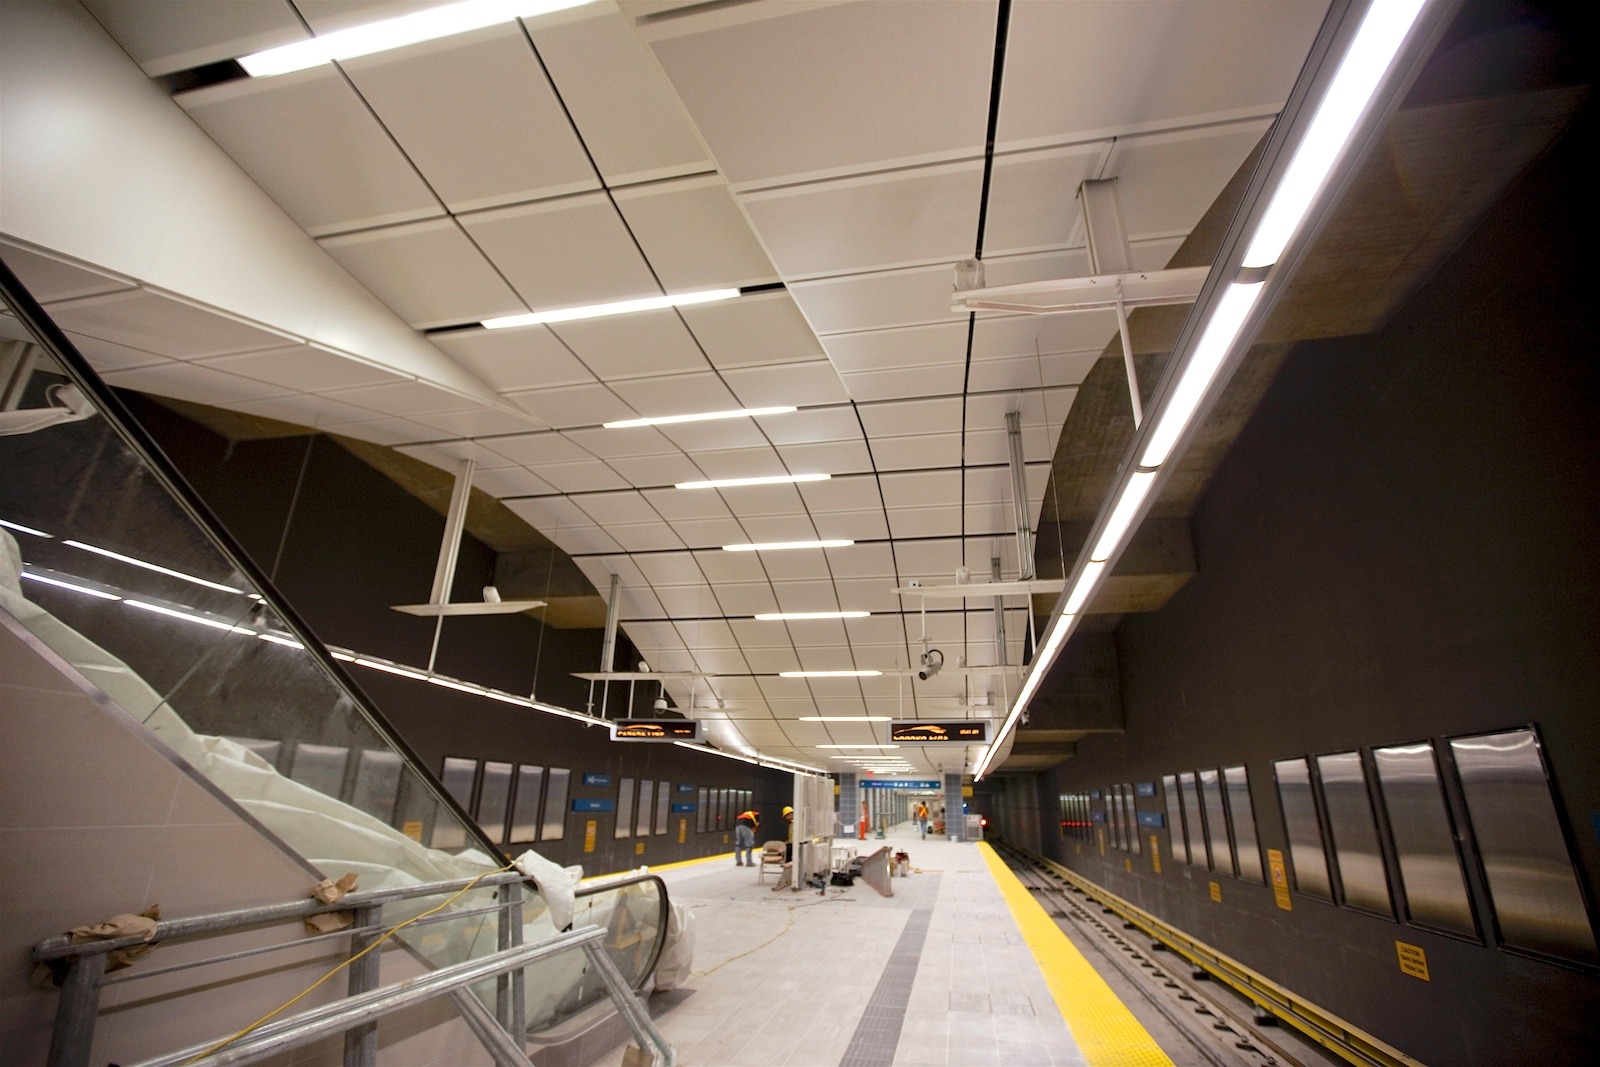 Infrastructure: Main Street SkyTrain Station
Completed 2015